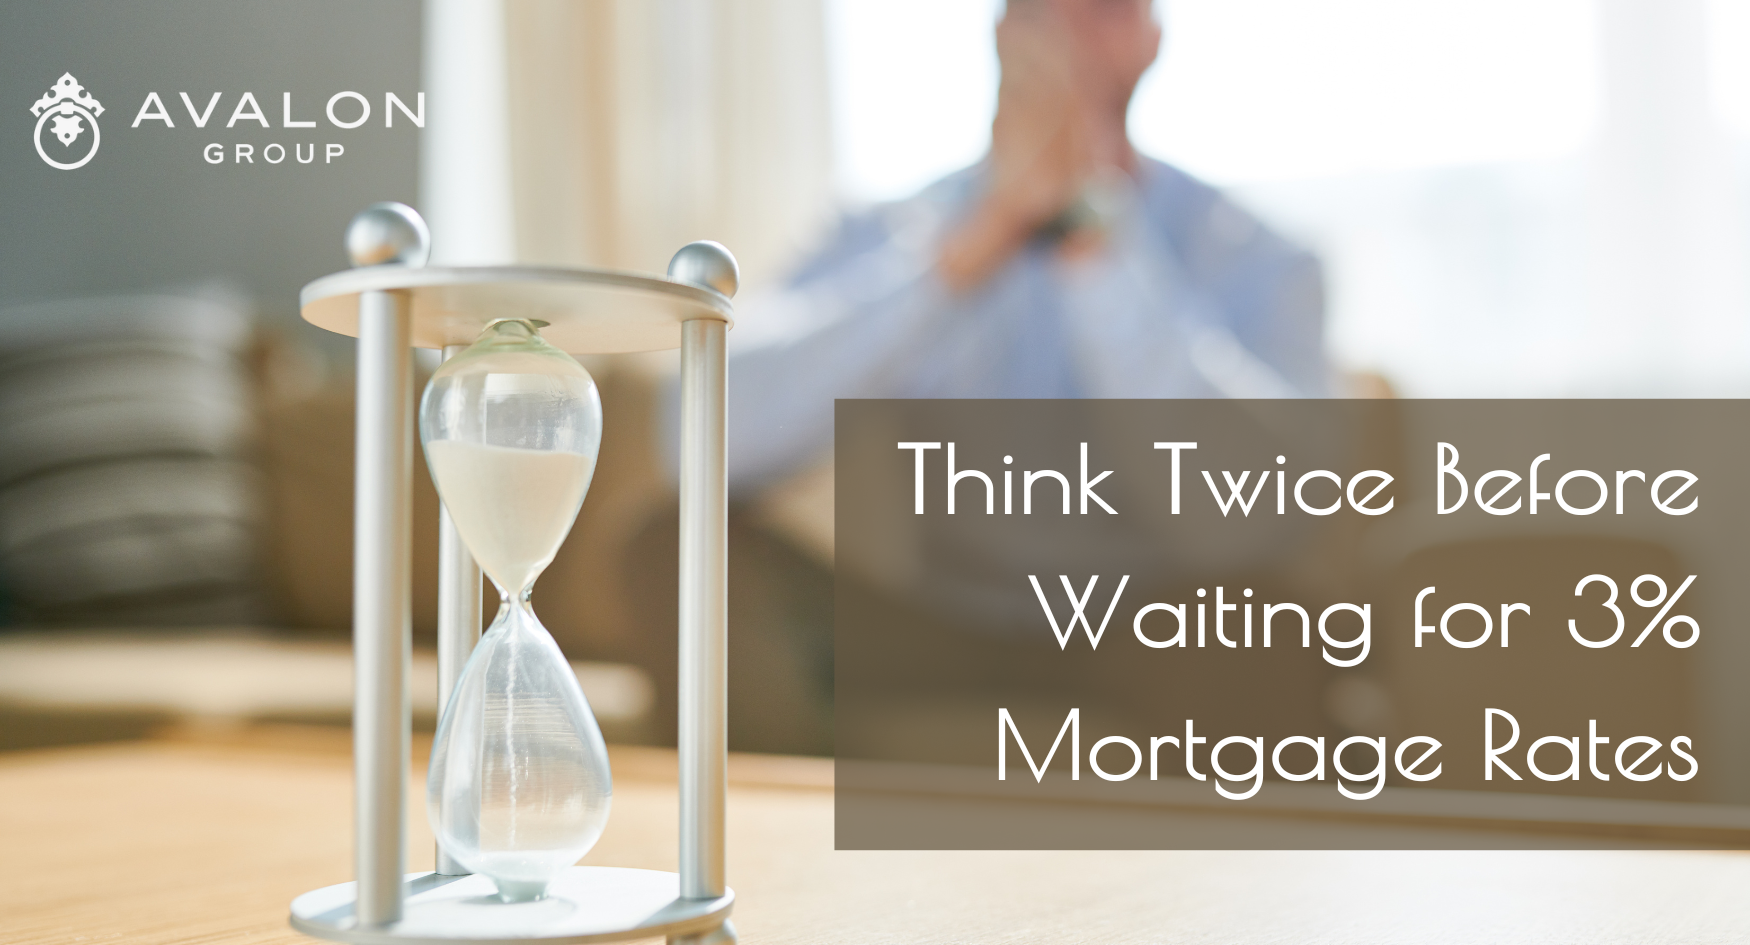 Think Twice Before Waiting for 3% Mortgage Rates Title page picture. Also, the picture has an hourglass on the table.